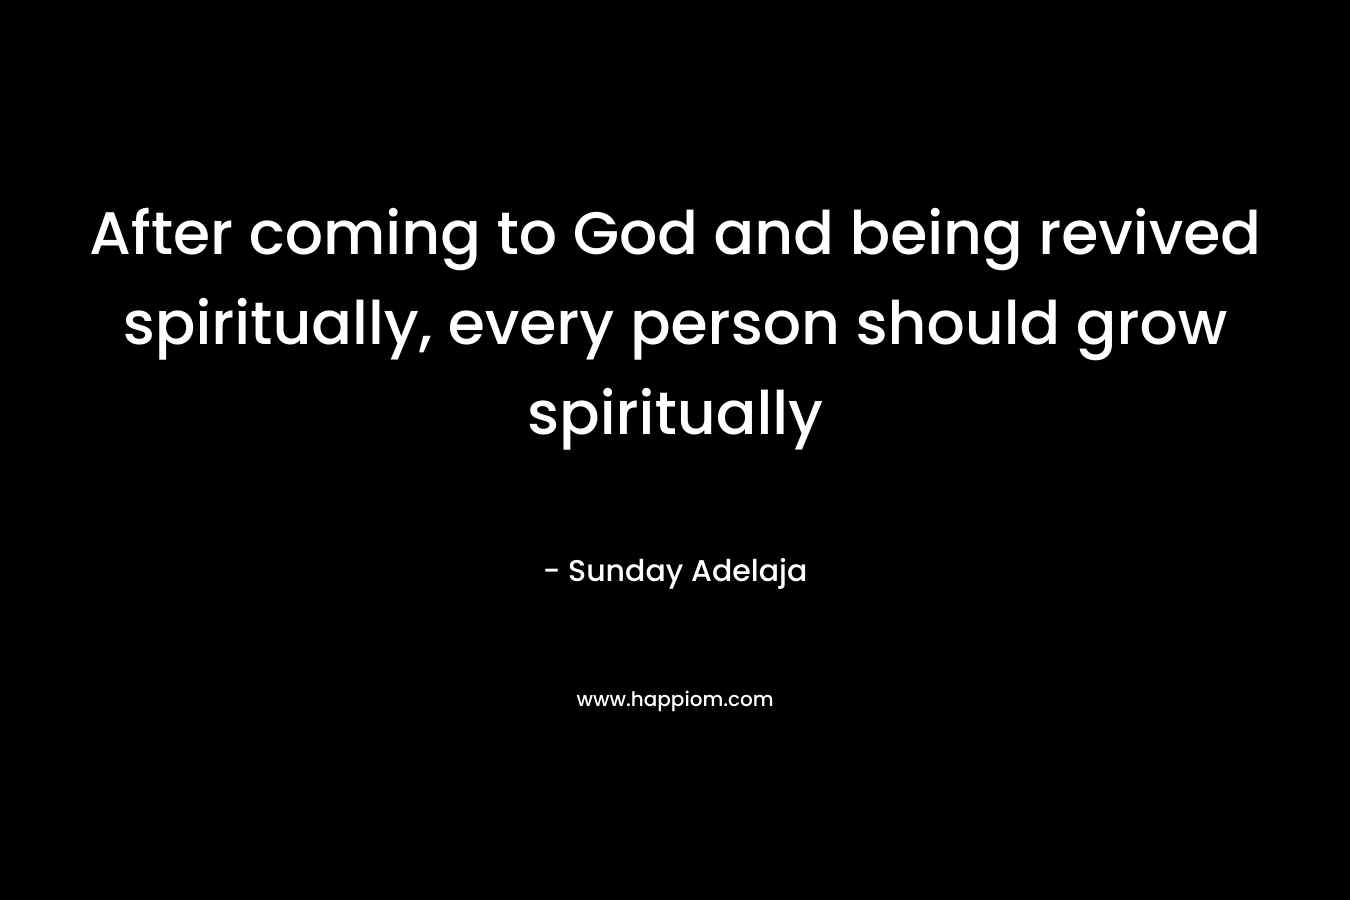 After coming to God and being revived spiritually, every person should grow spiritually